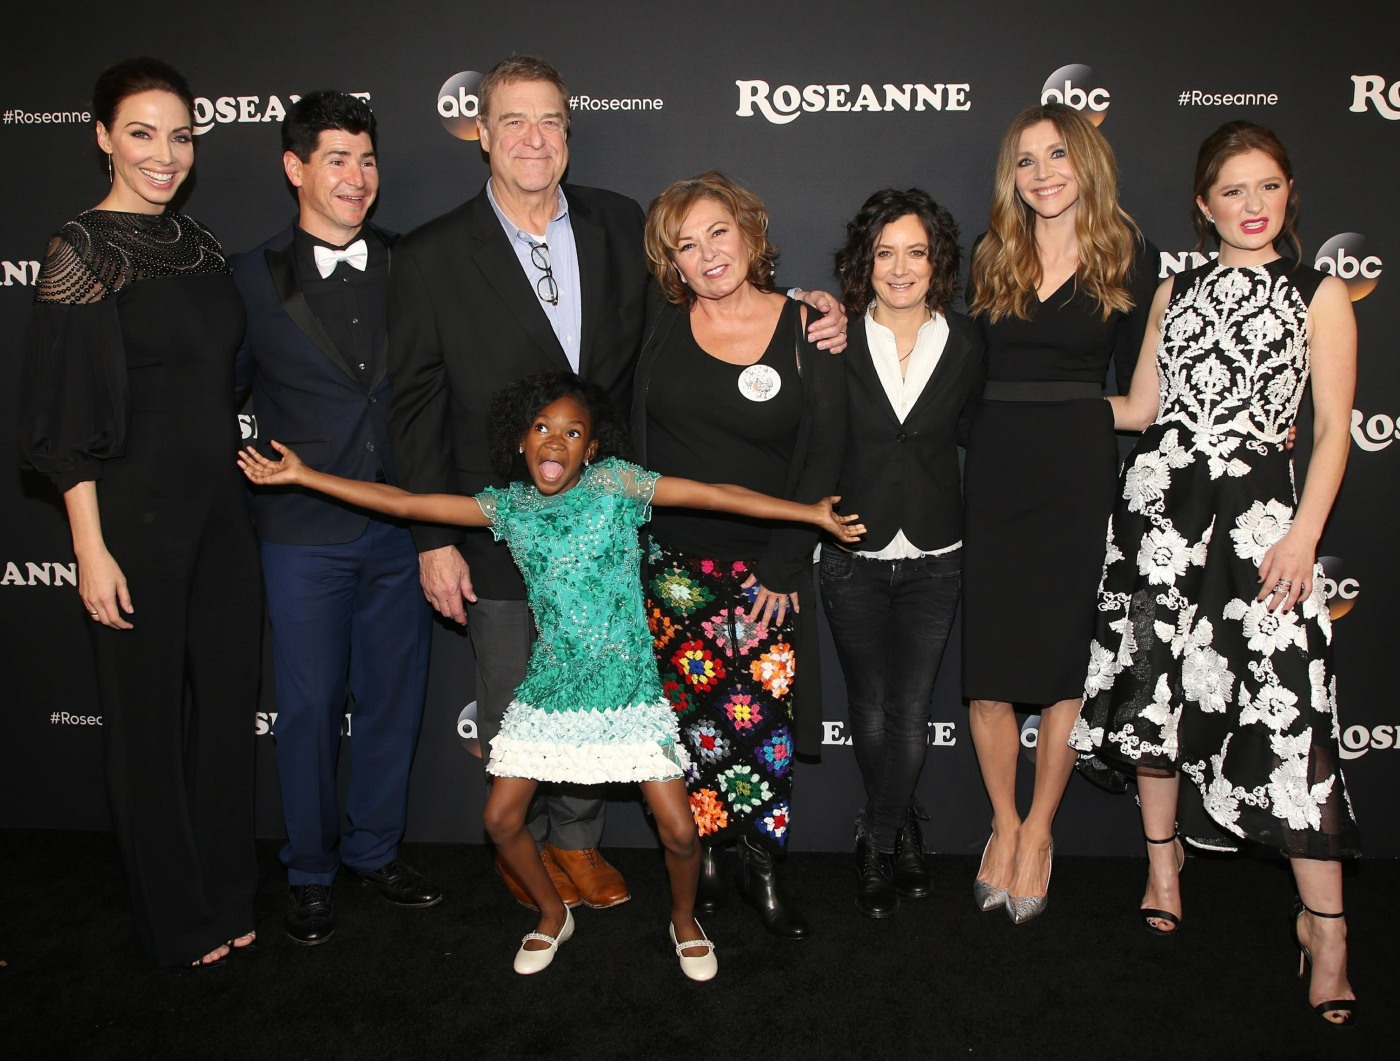 The "Roseanne" premiere event red carpet arrivals